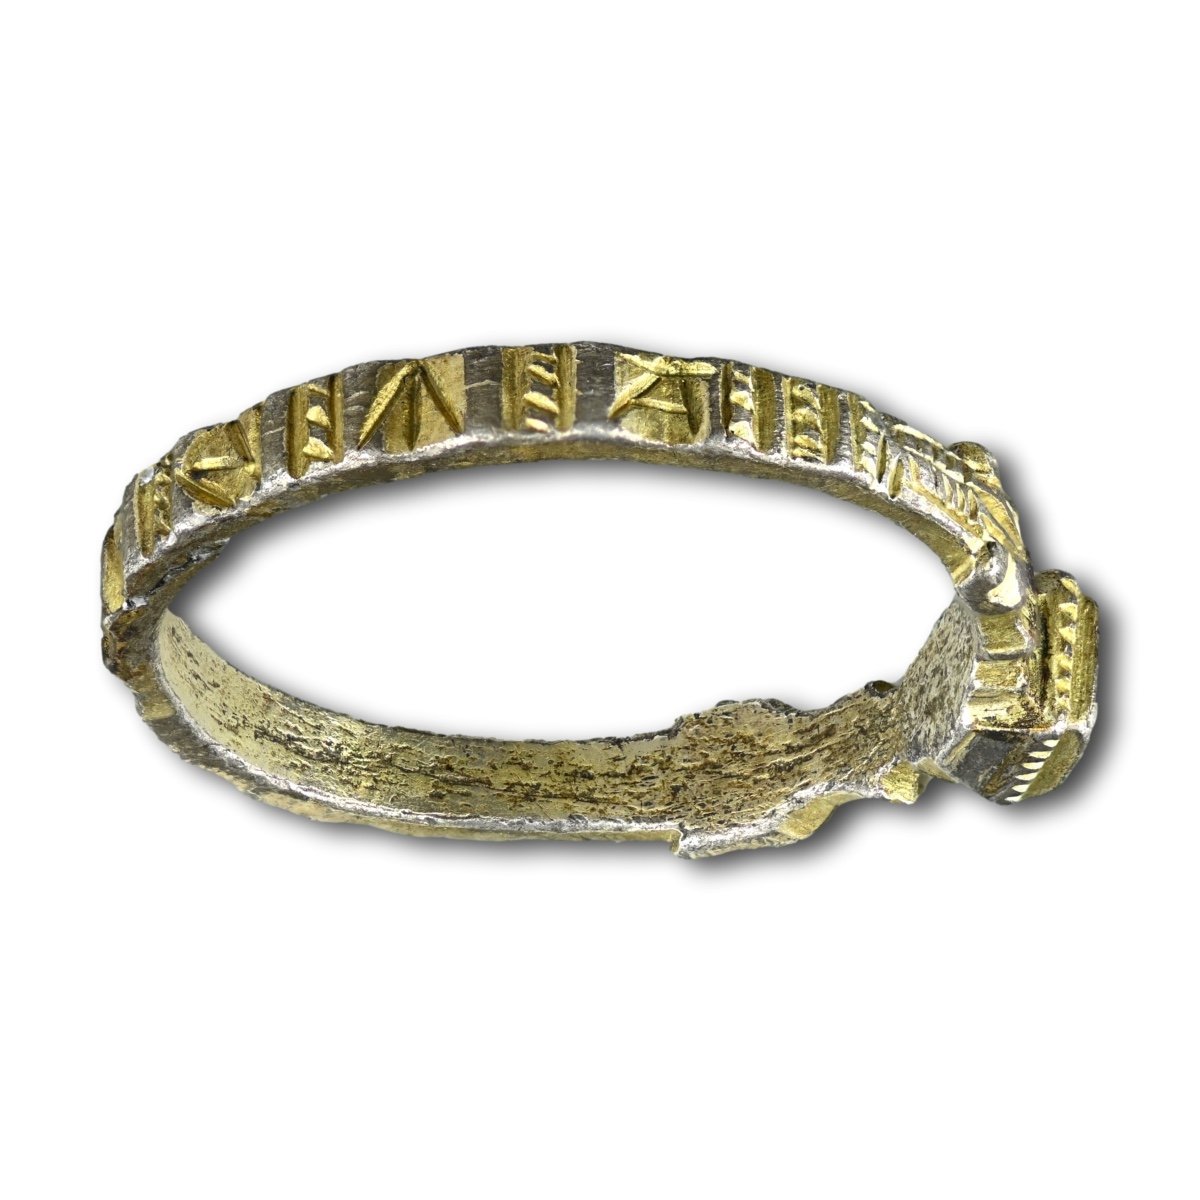 Medieval Silver Gilt And Niello Ring With Dragons. Italian, 13th / 14th Century.-photo-3